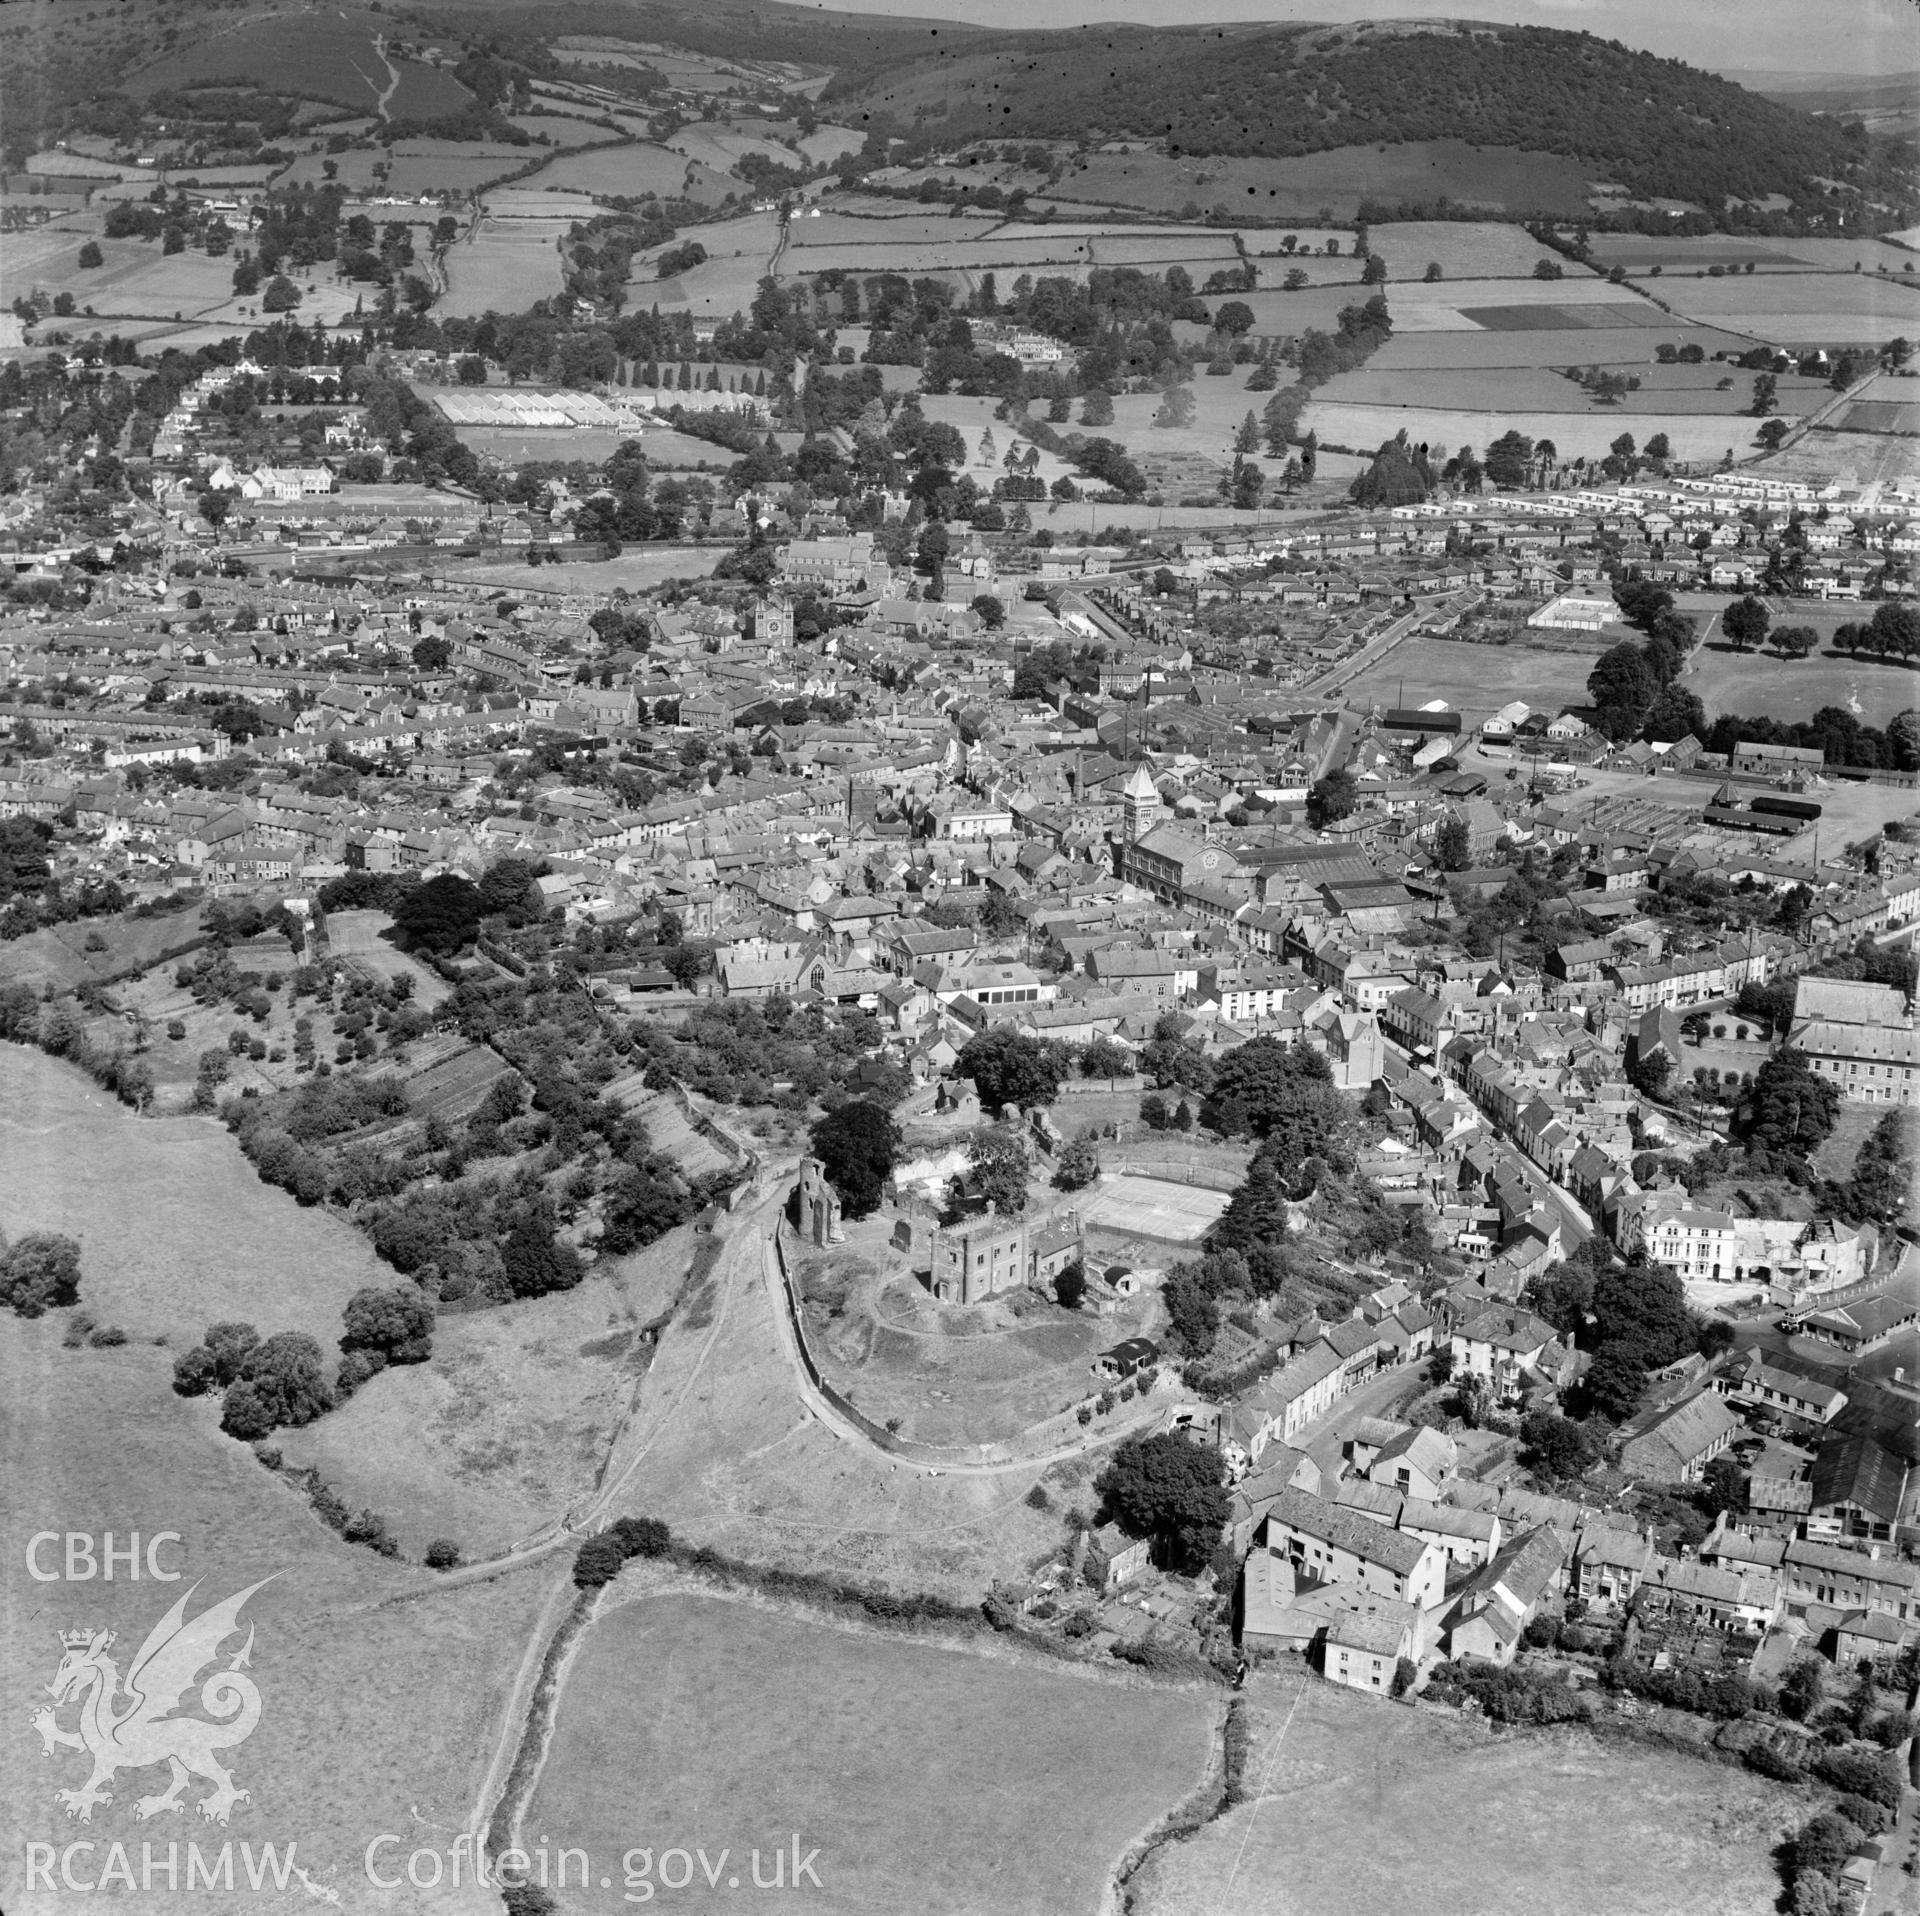 View of Abergavenny showing castle